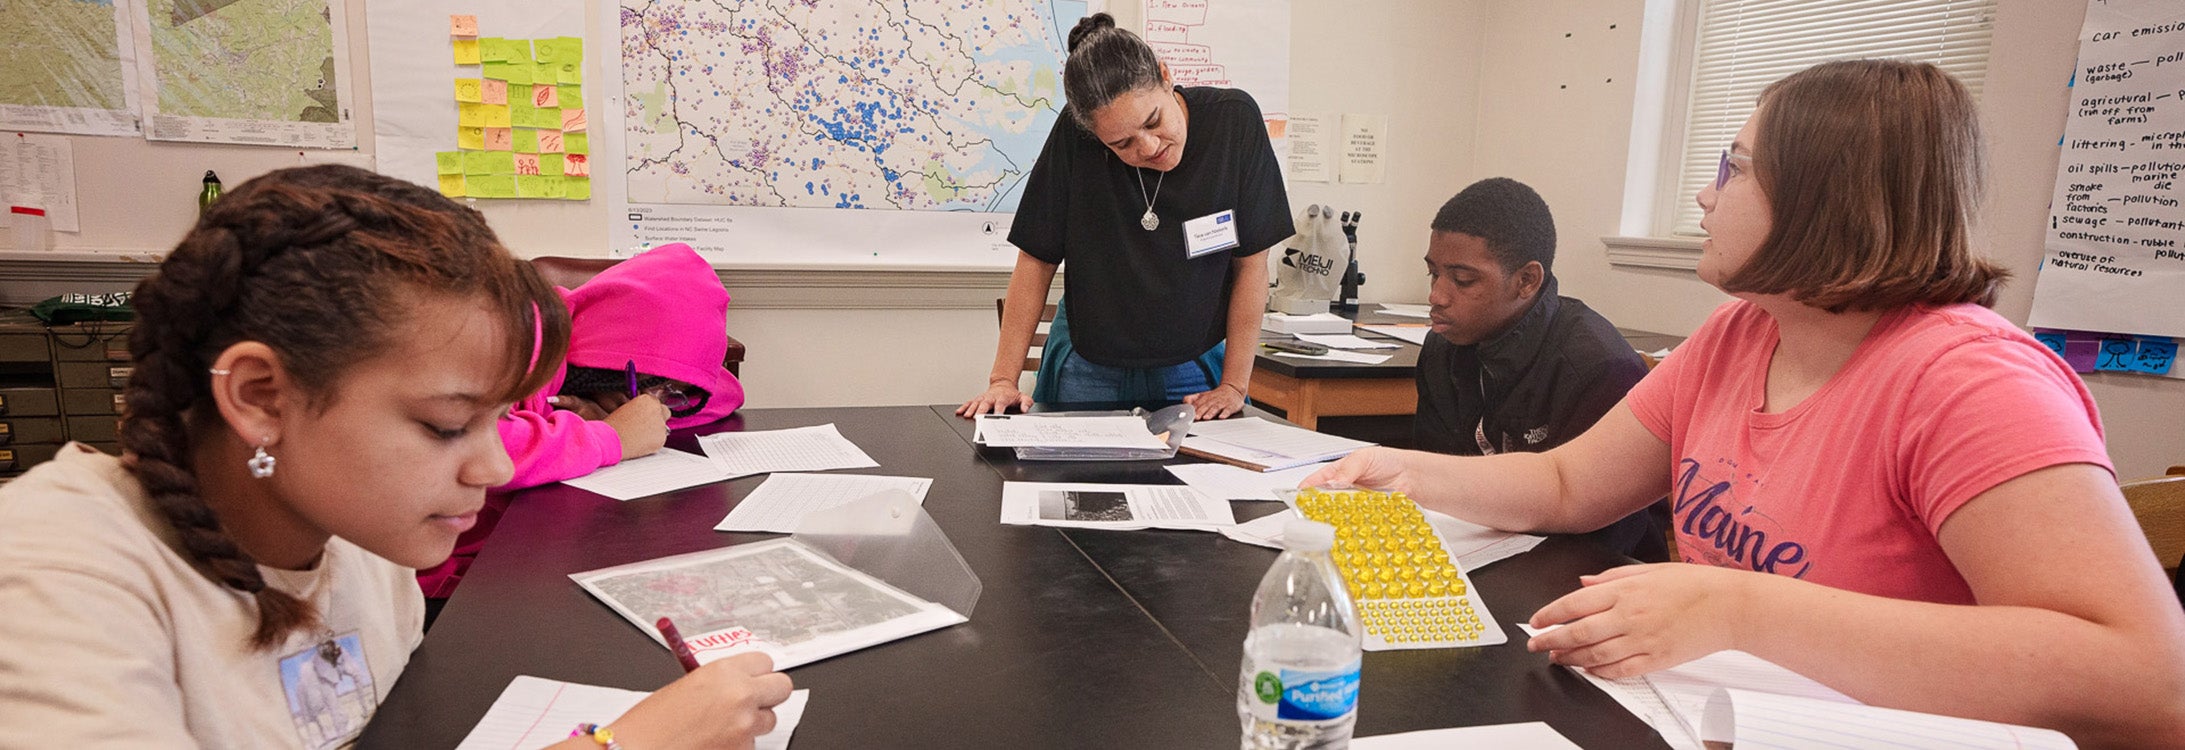 Students compile data from water samples in ECU’s Community Science Camp in Graham Building.